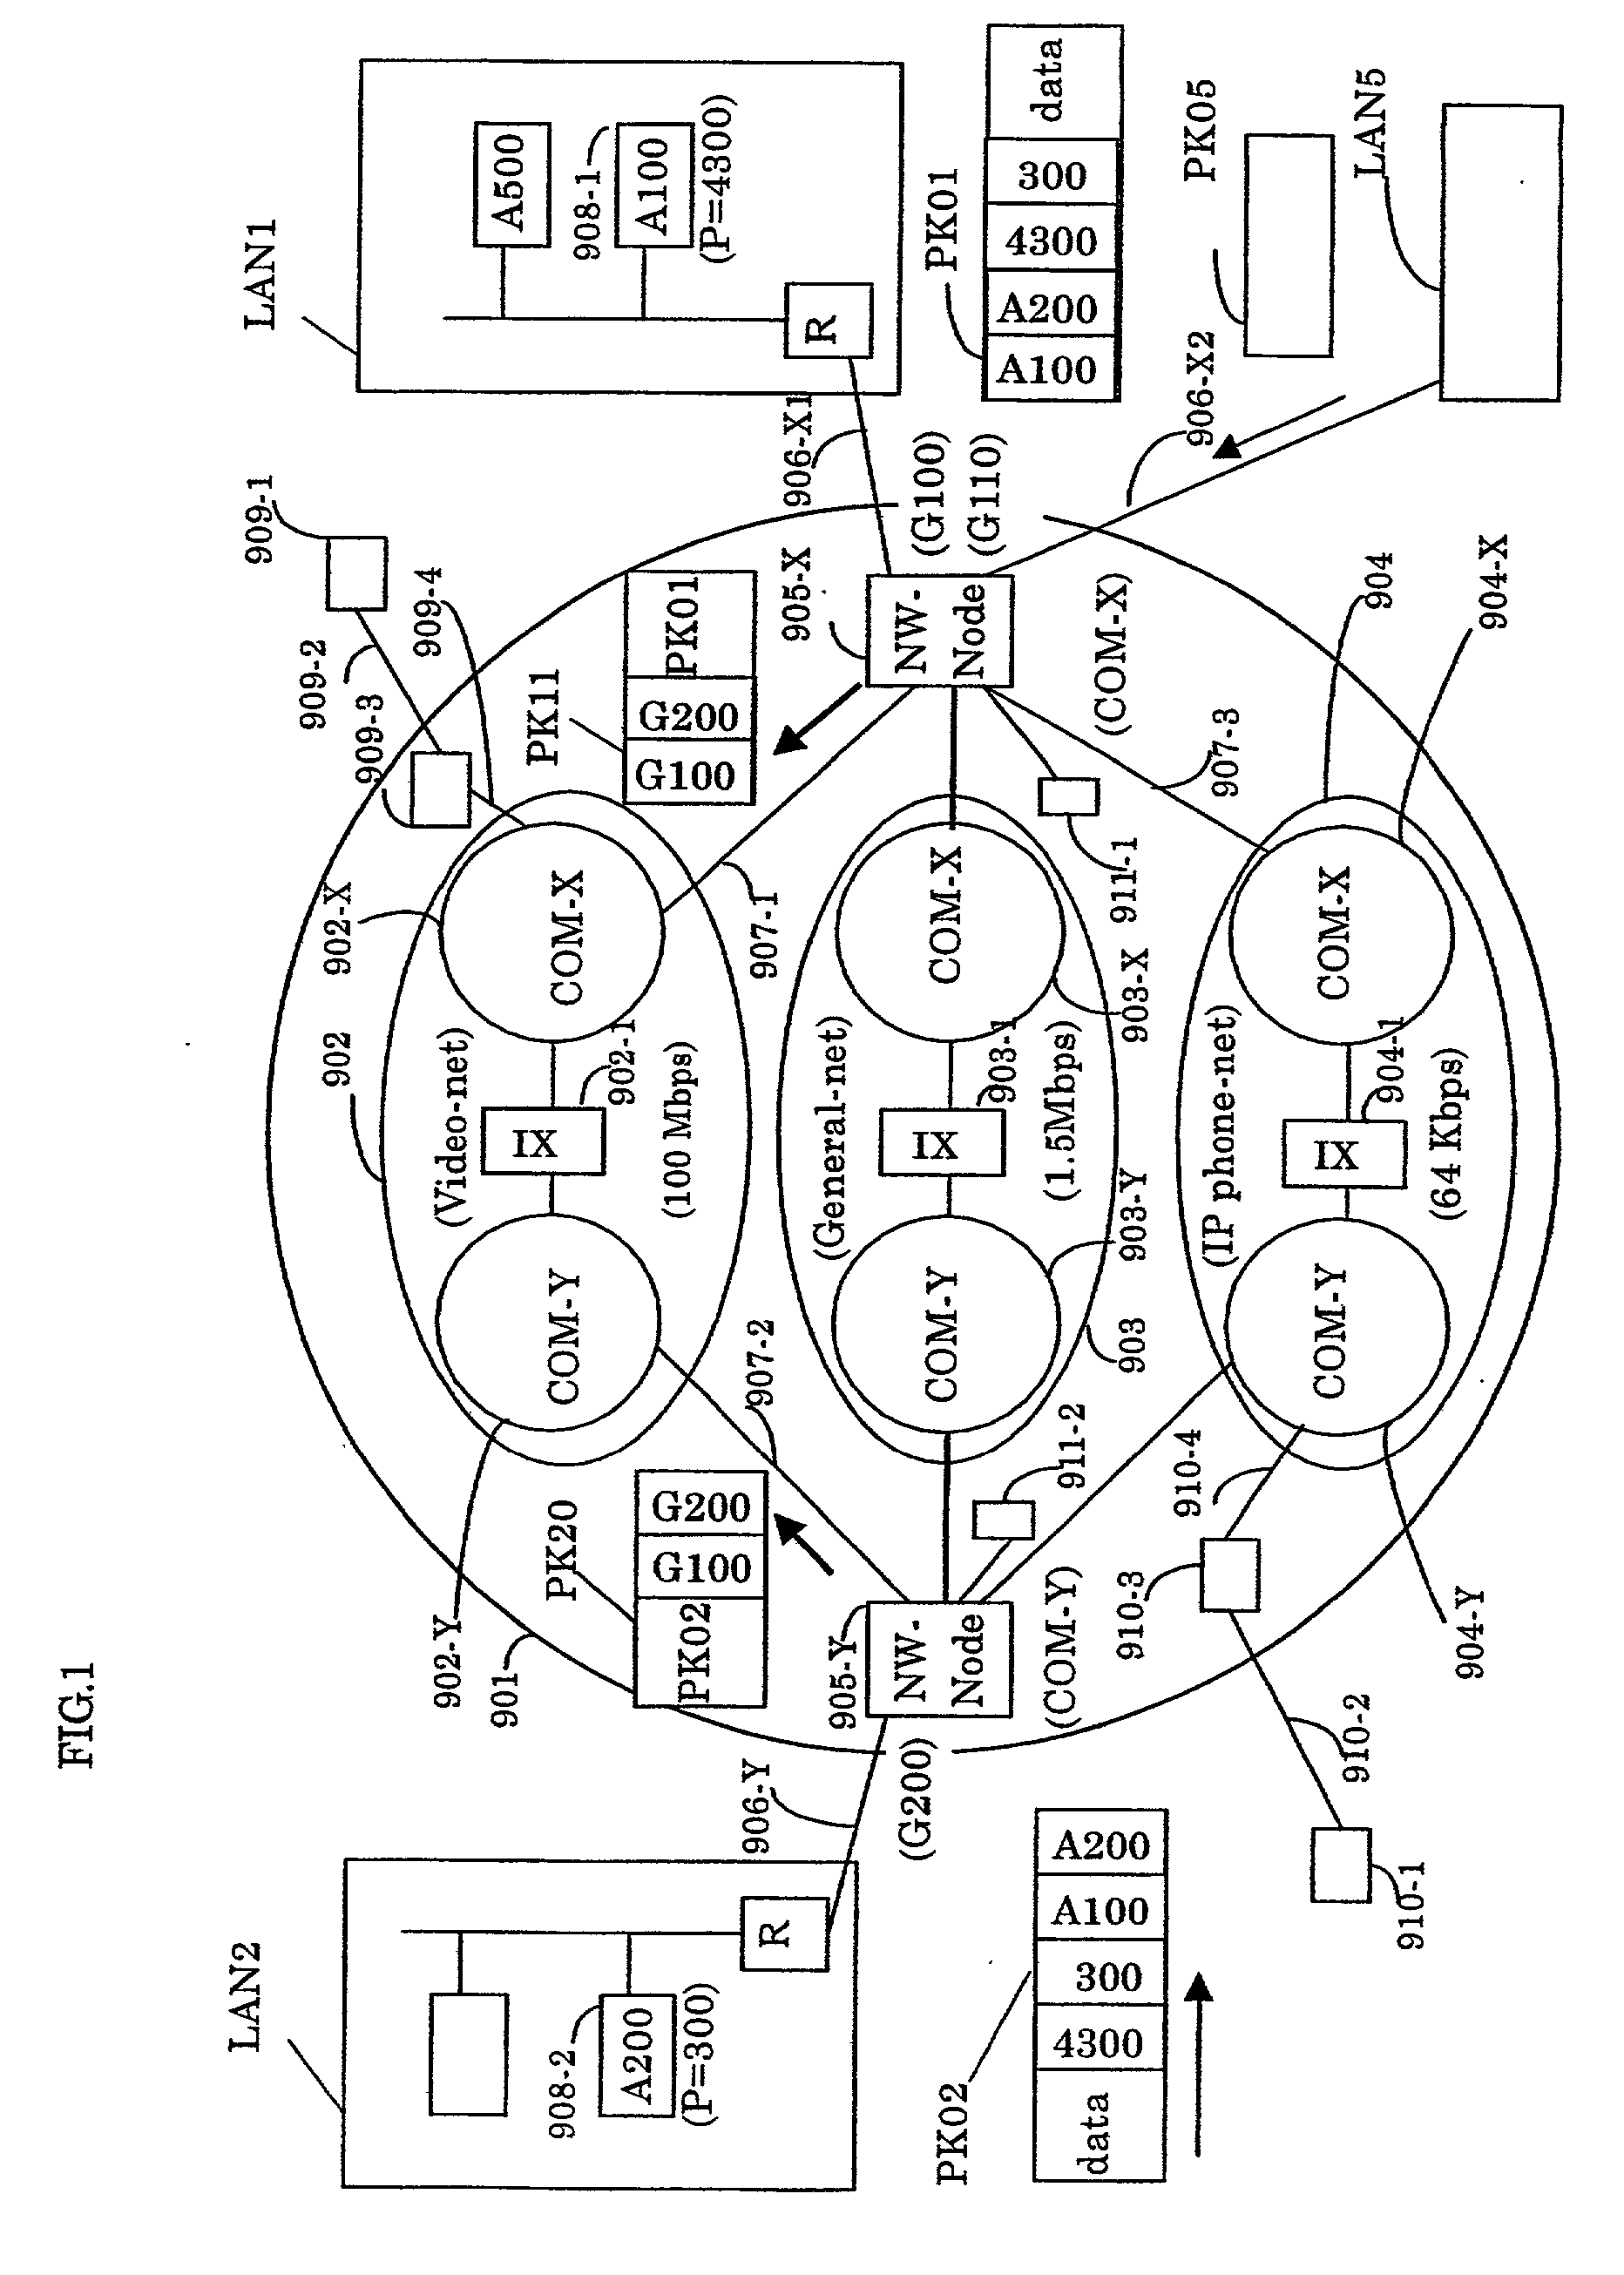 Terminal -to-terminal communication connection control method using IP transfer network